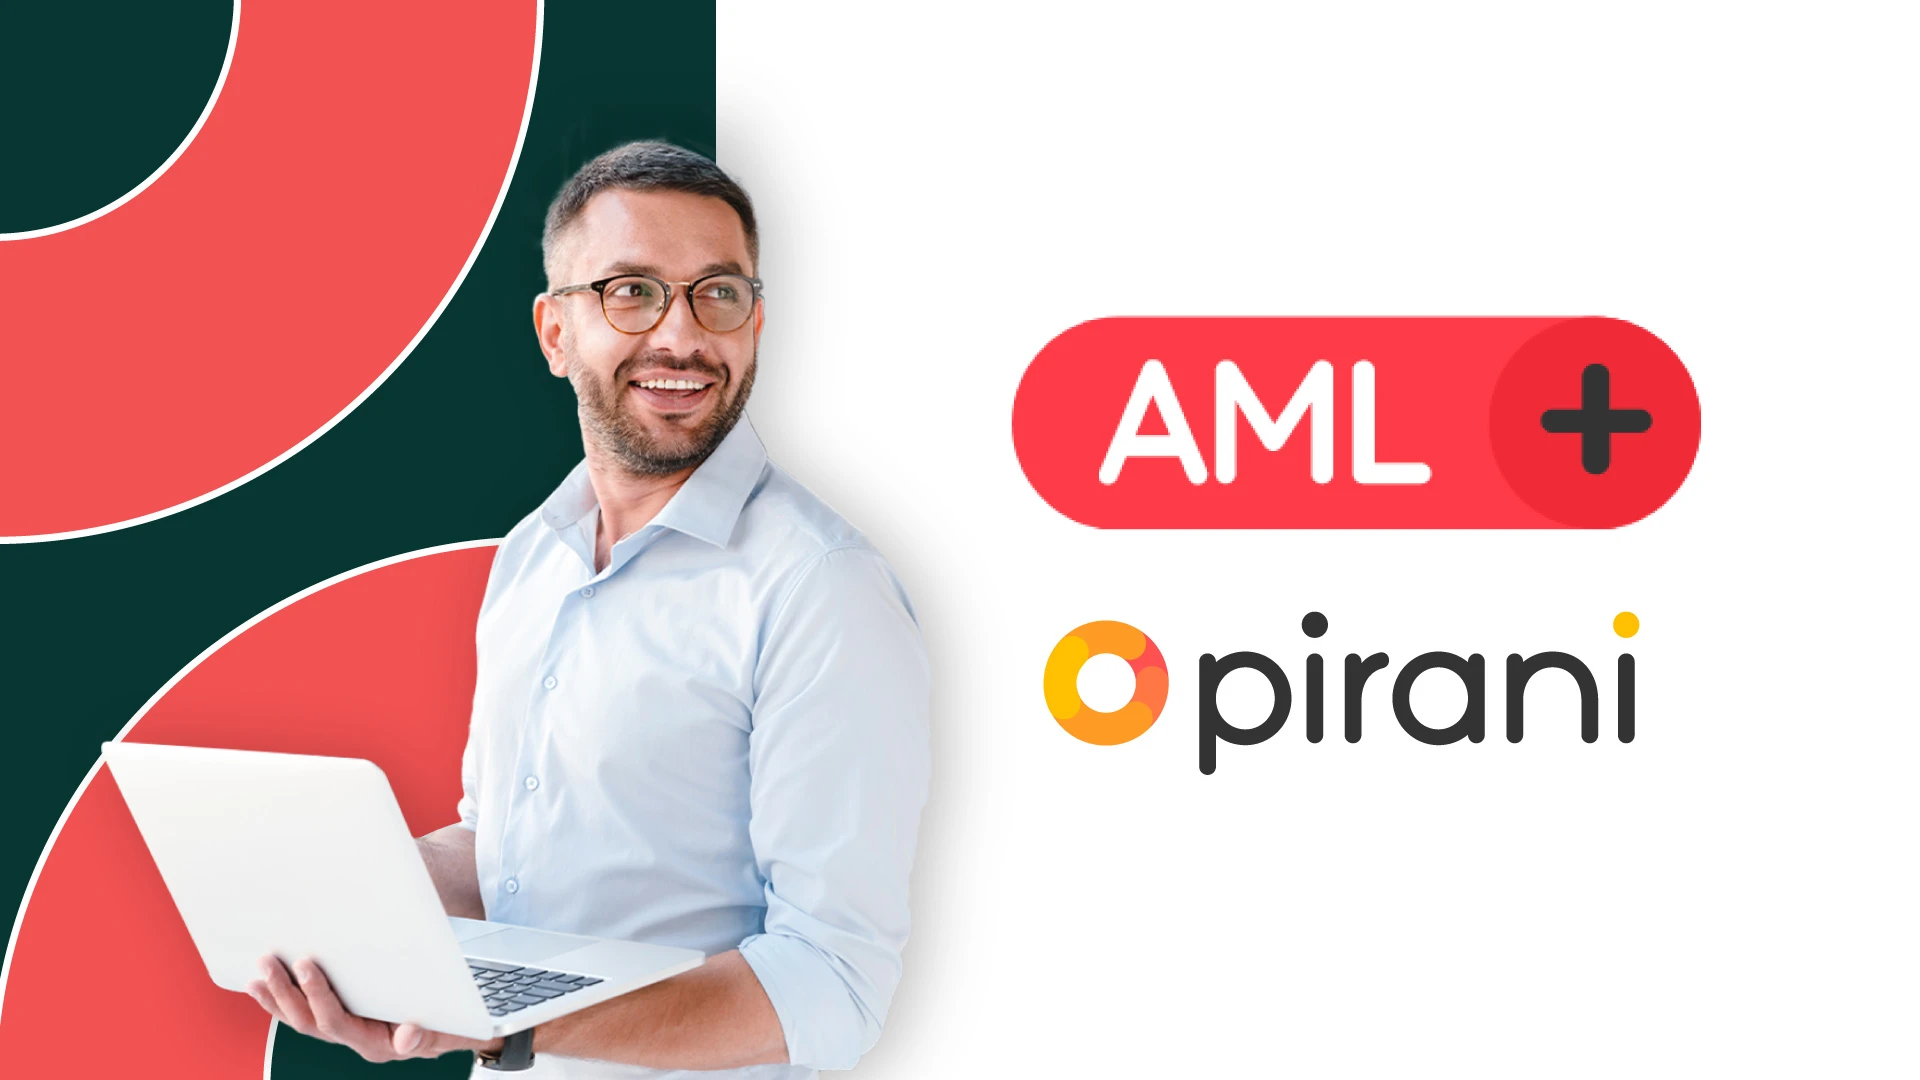 Upgrade your AML risk management with AML+